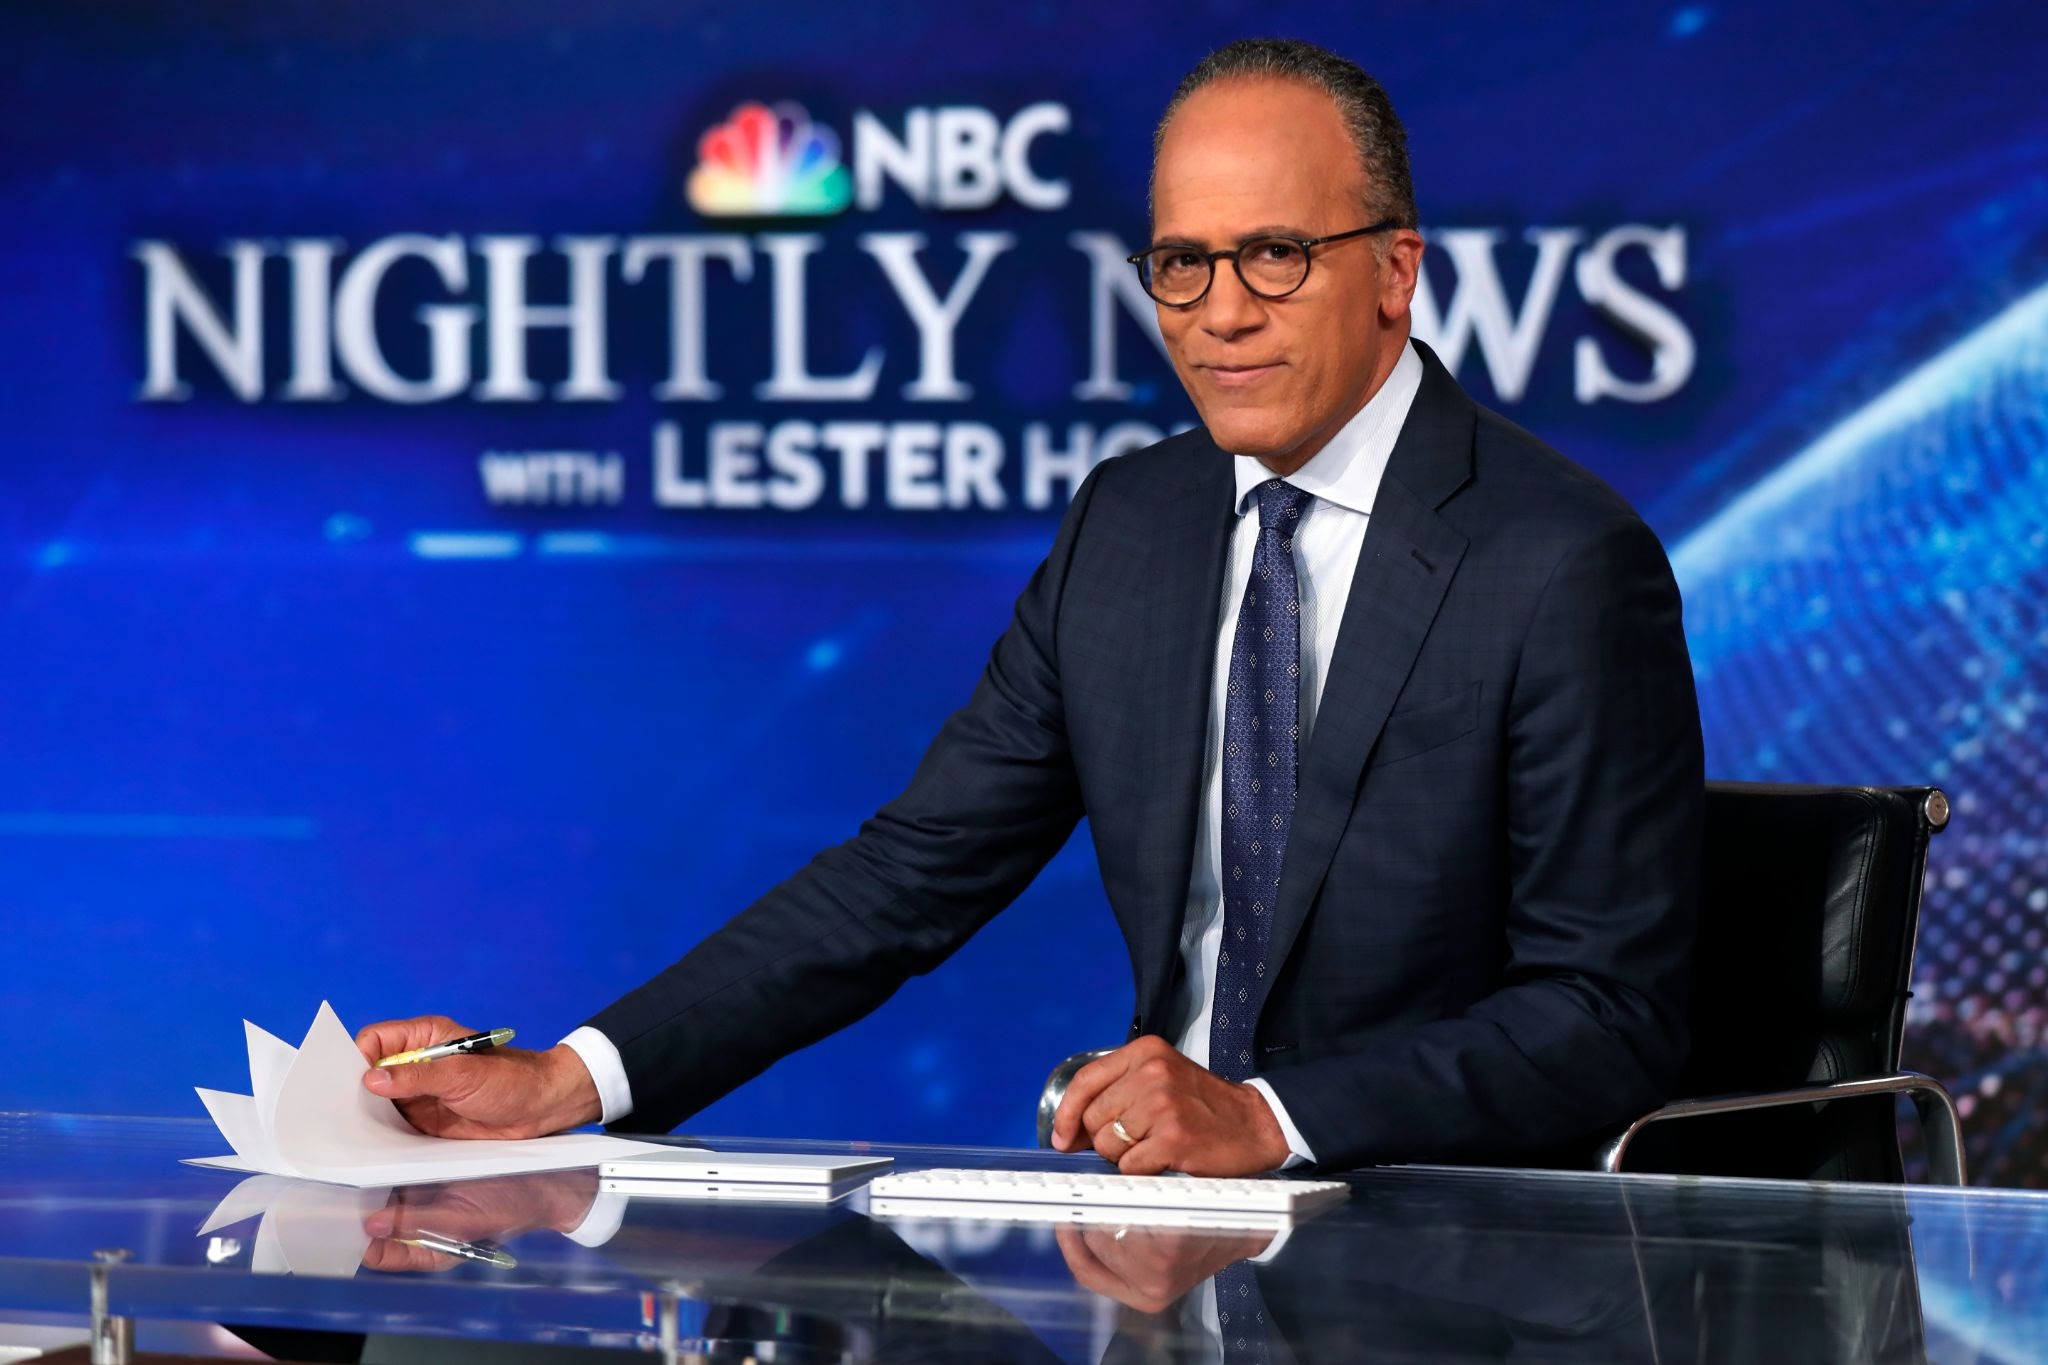 NBC News’ Lester Holt scores a mustsee interview. Here’s who it is